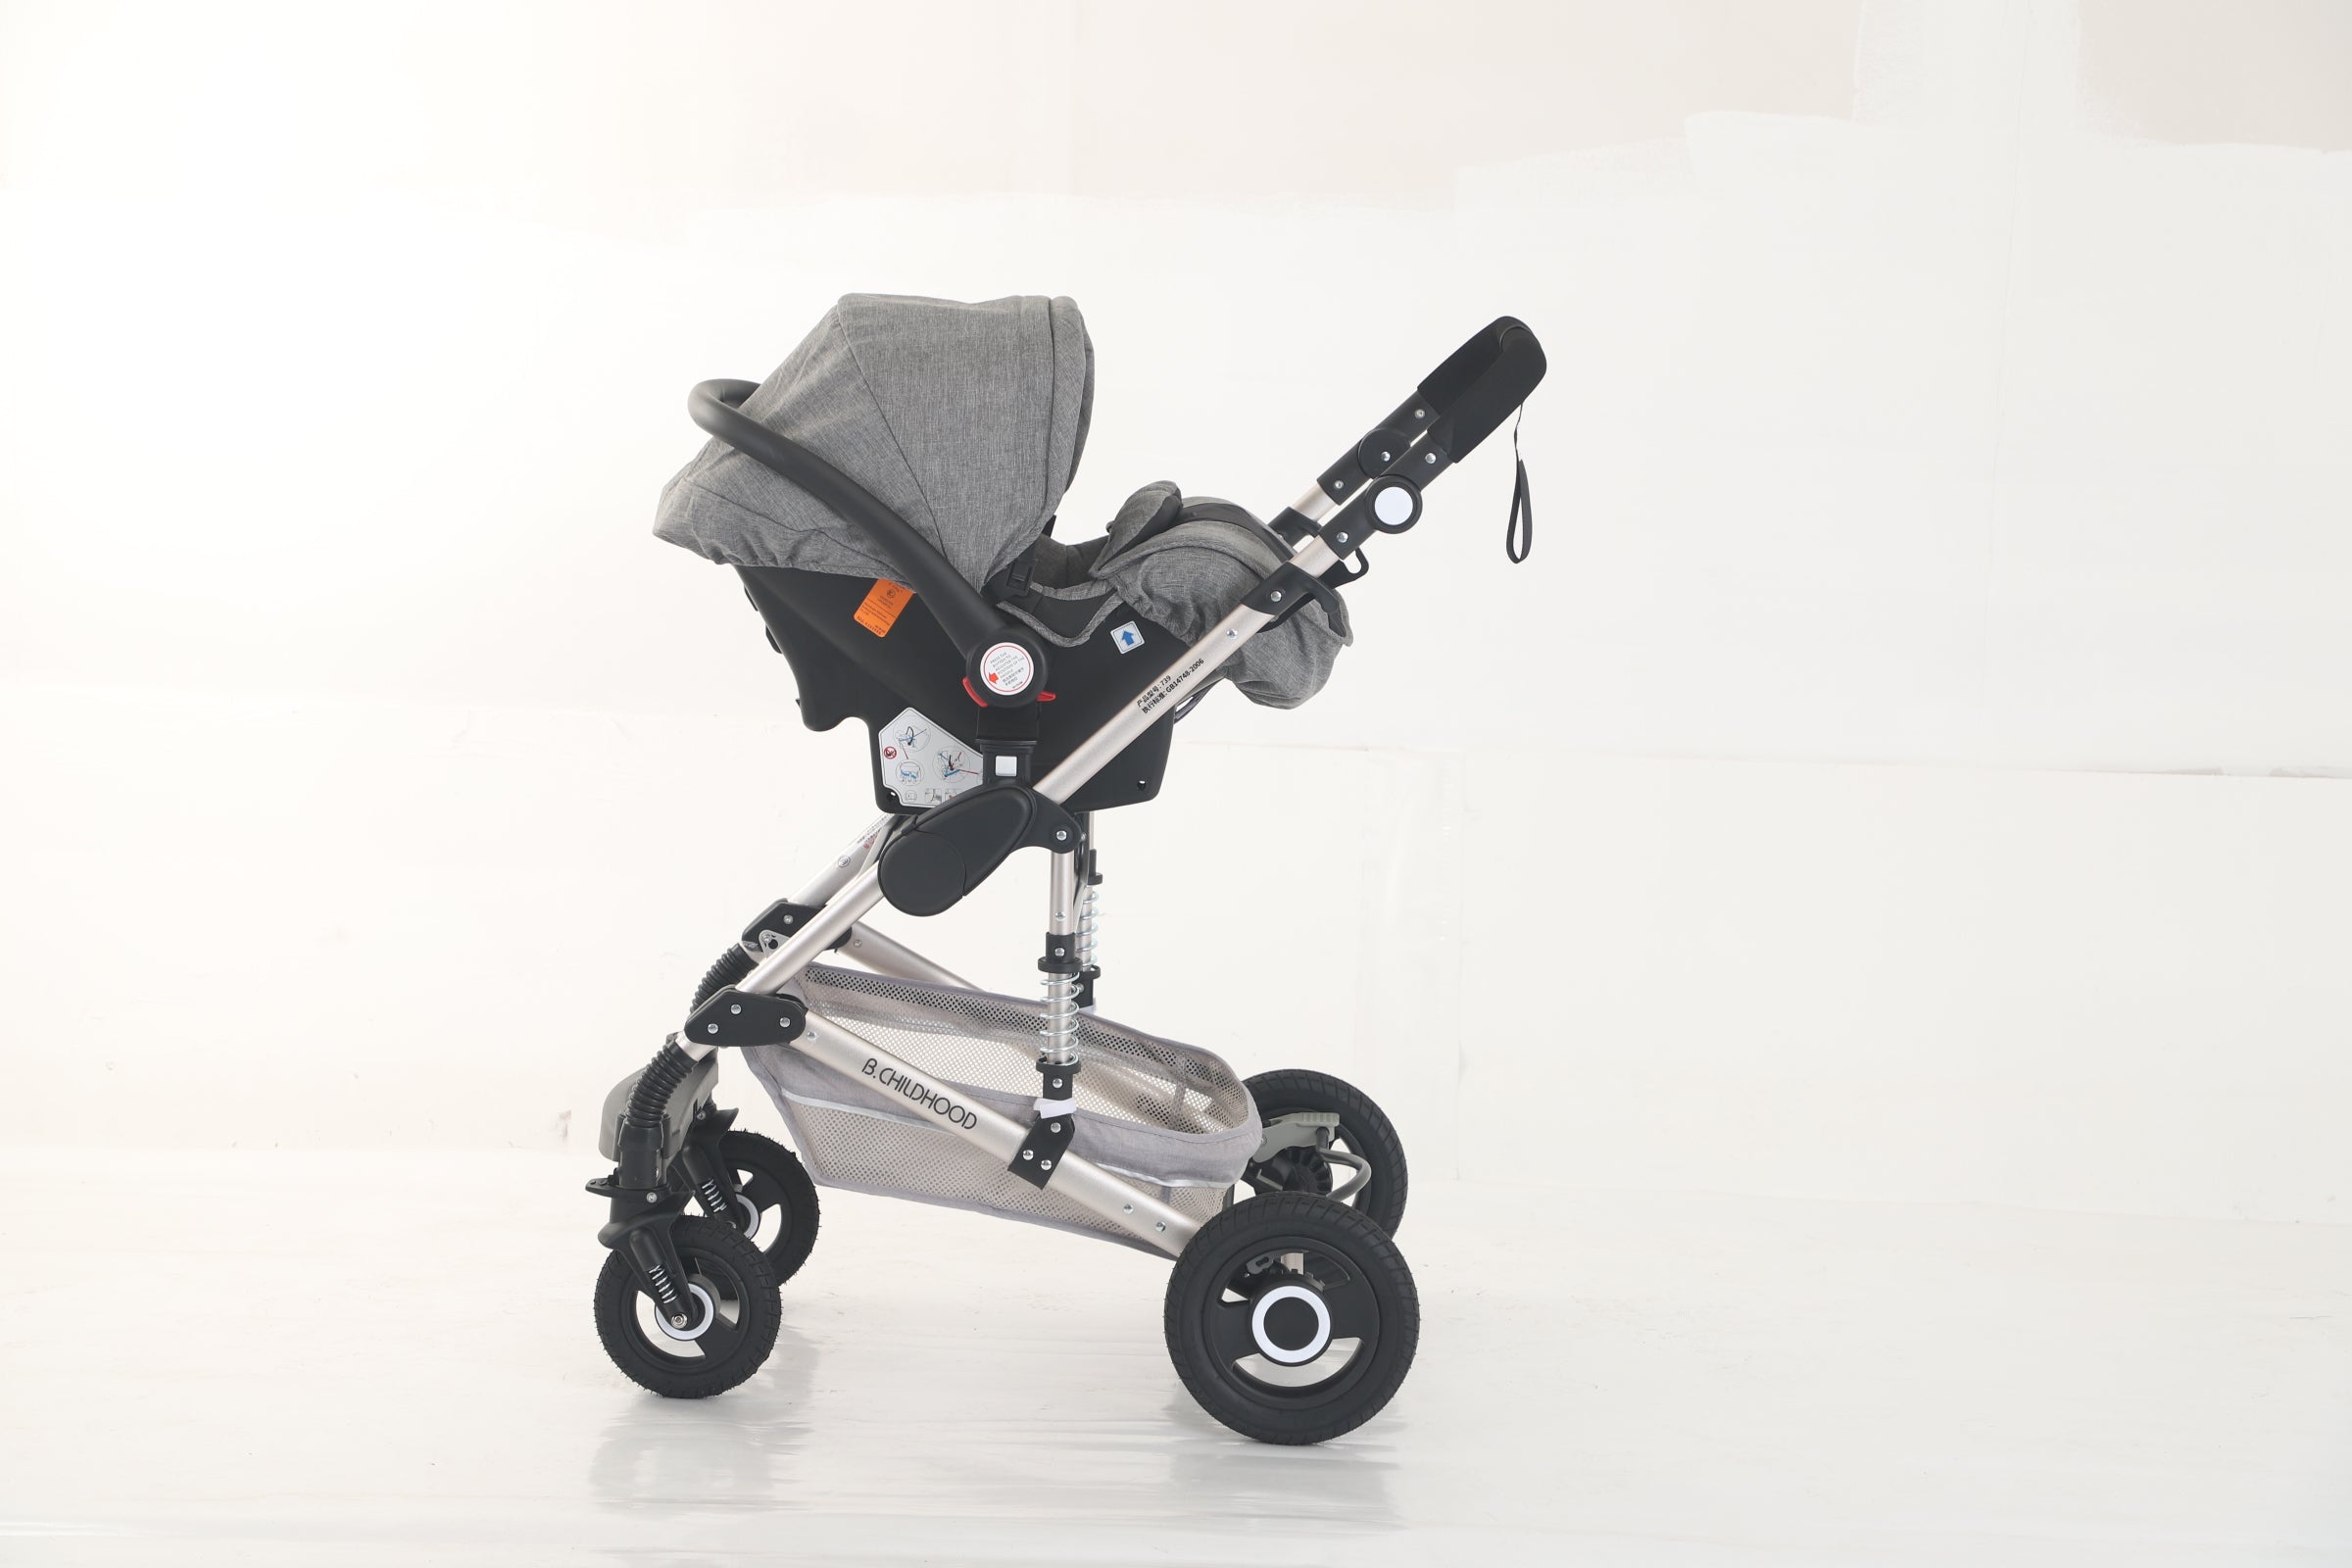 New Born Prams 3 IN 1 Baby Stroller with Car Seat Carriage